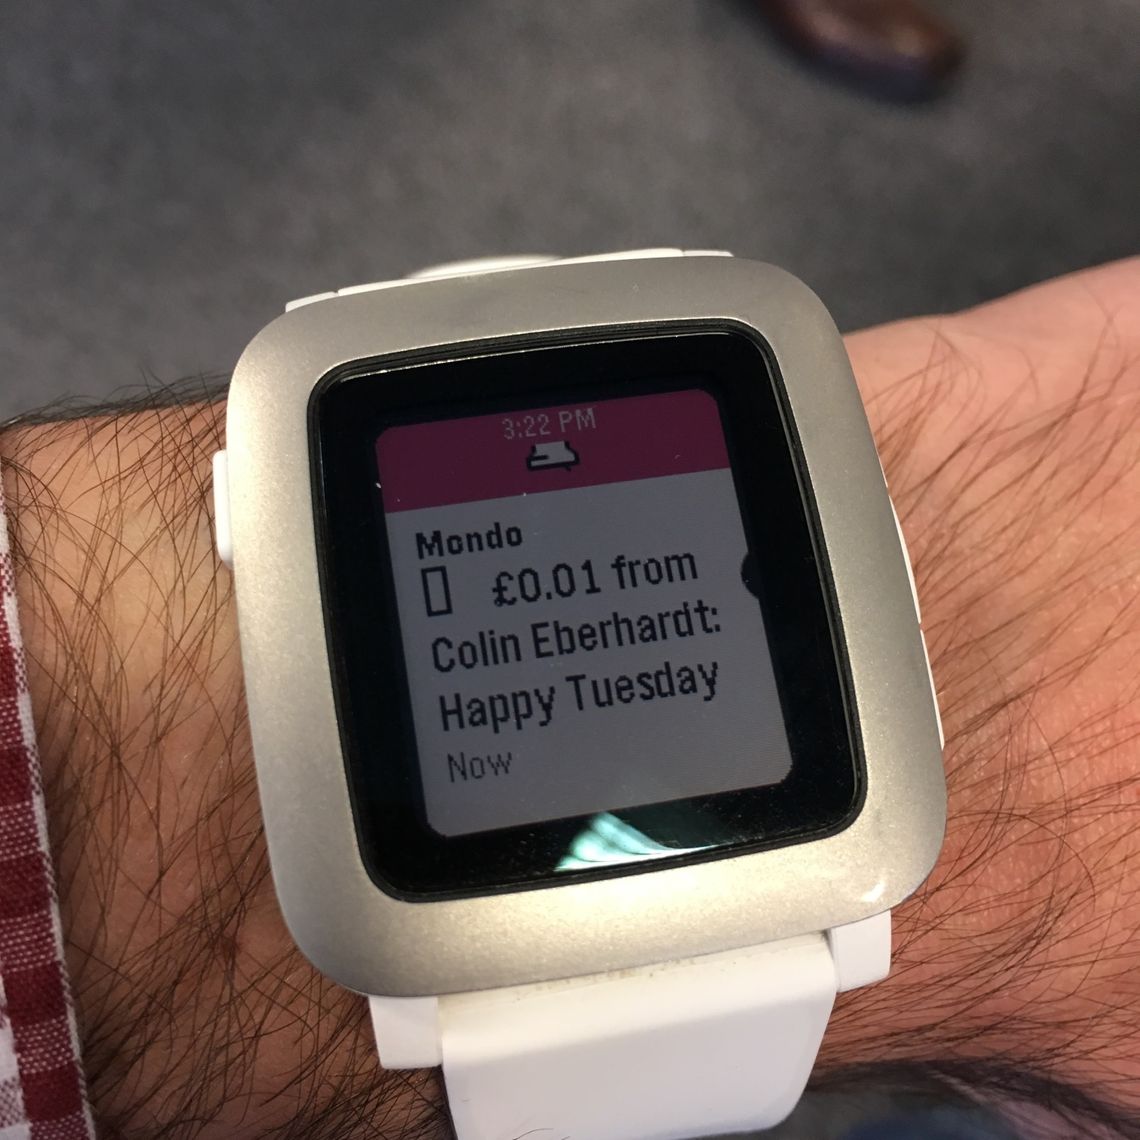 A notification on my watch